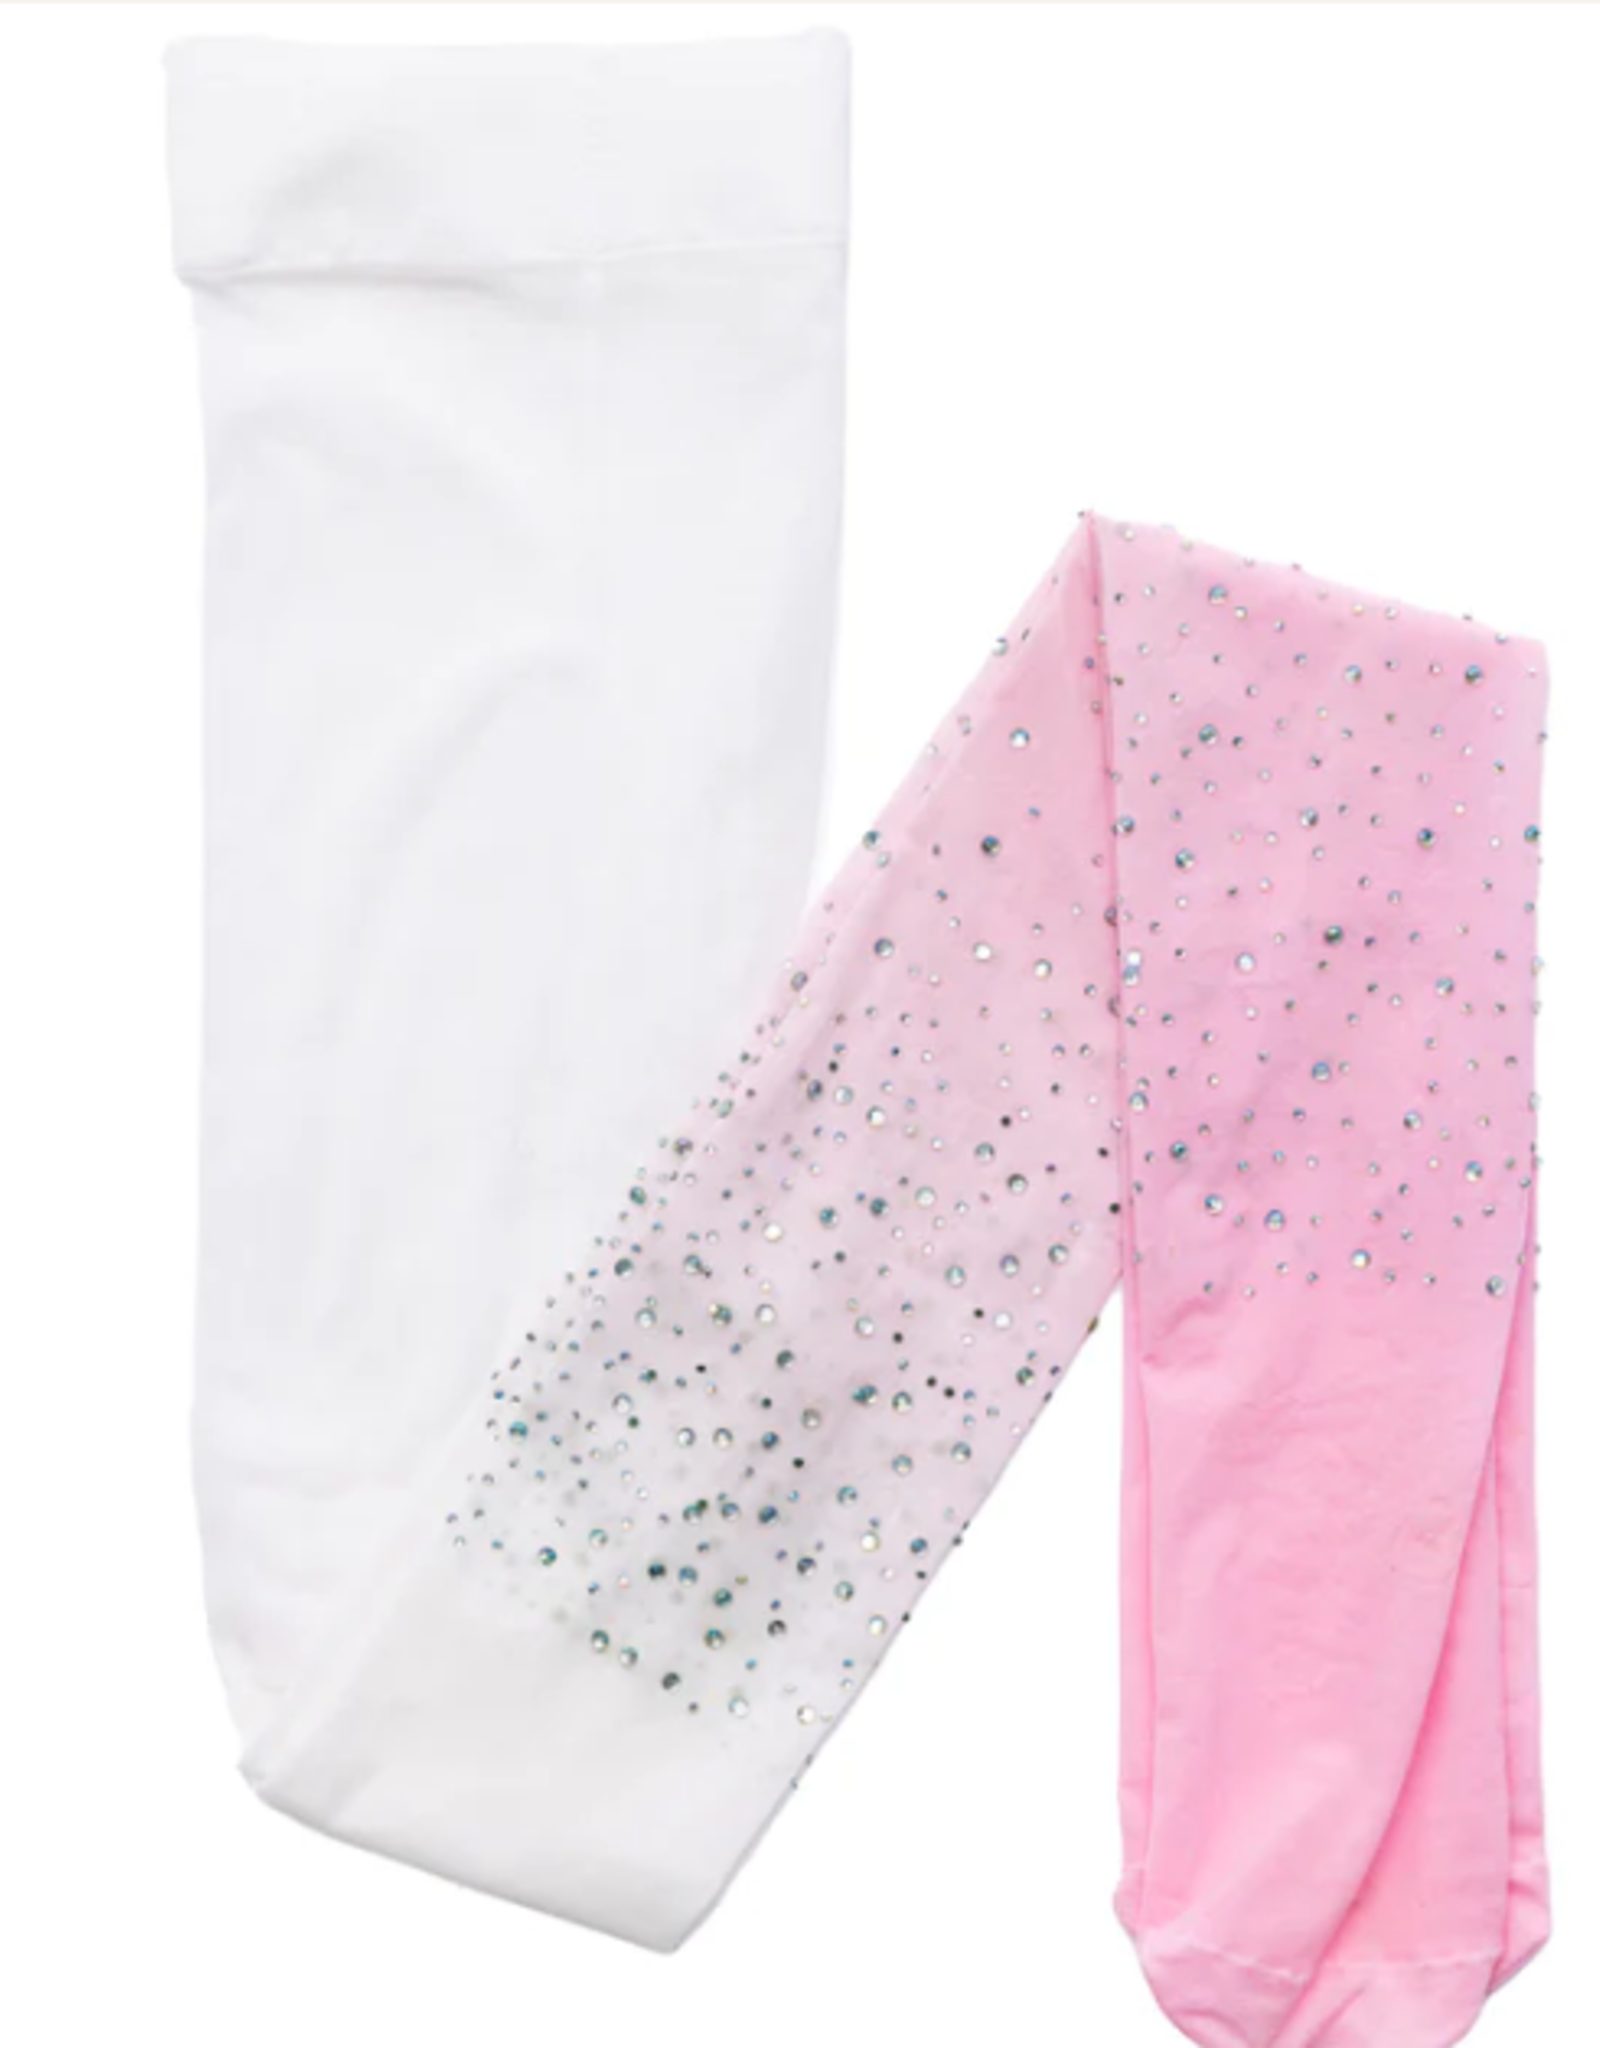 Great Pretenders Ombre Rhinestone Tights, Lt Pink/White -Size 3-8